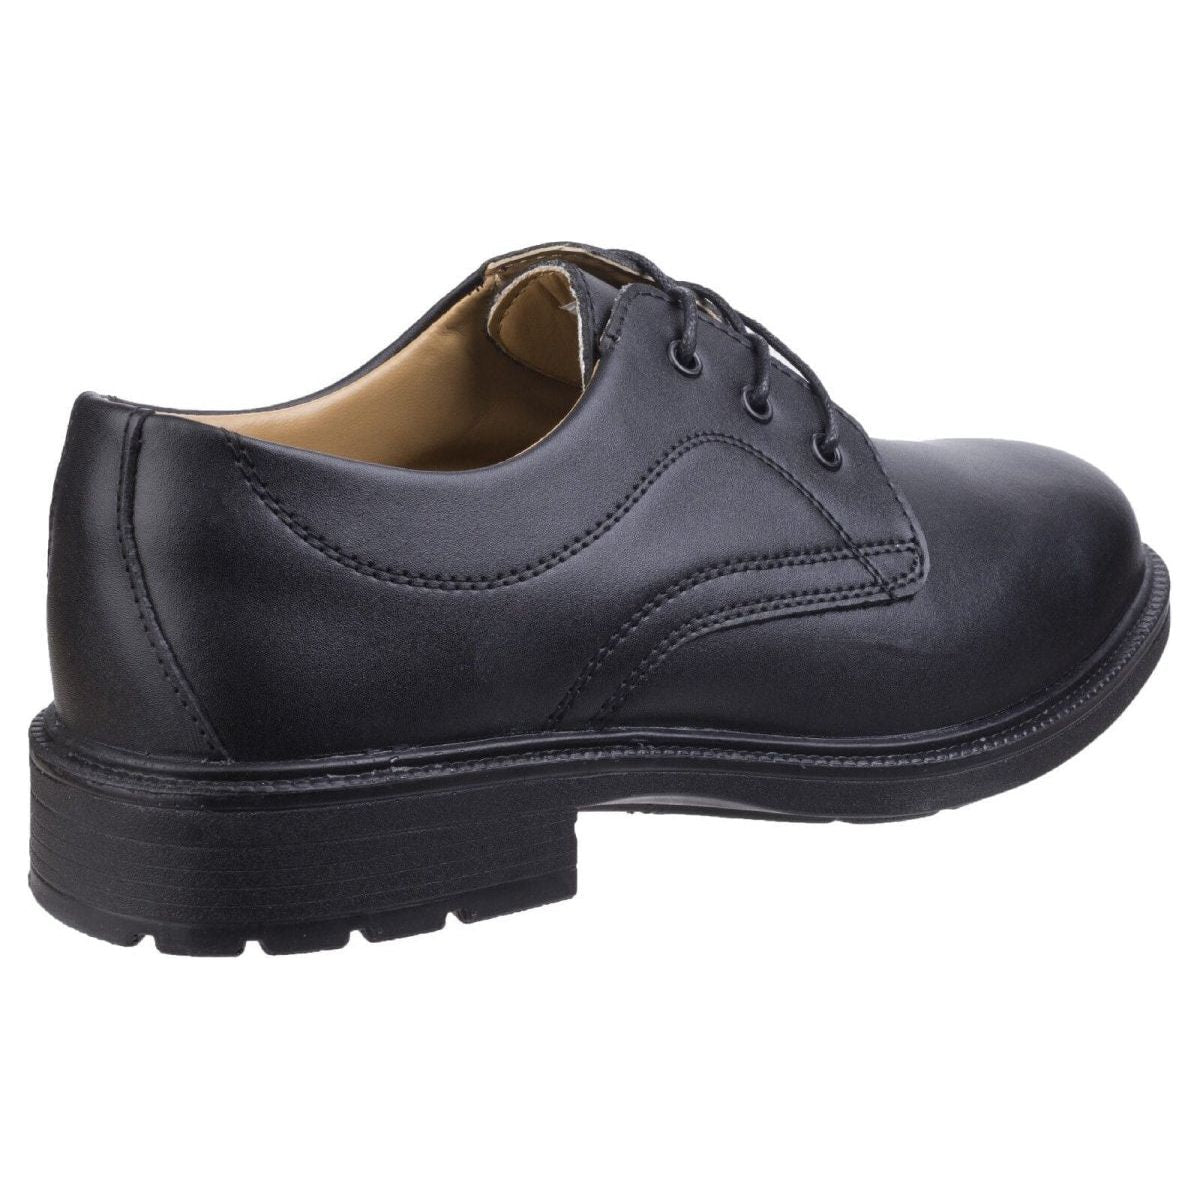 Amblers Fs45 Safety Shoes Mens - workweargurus.com